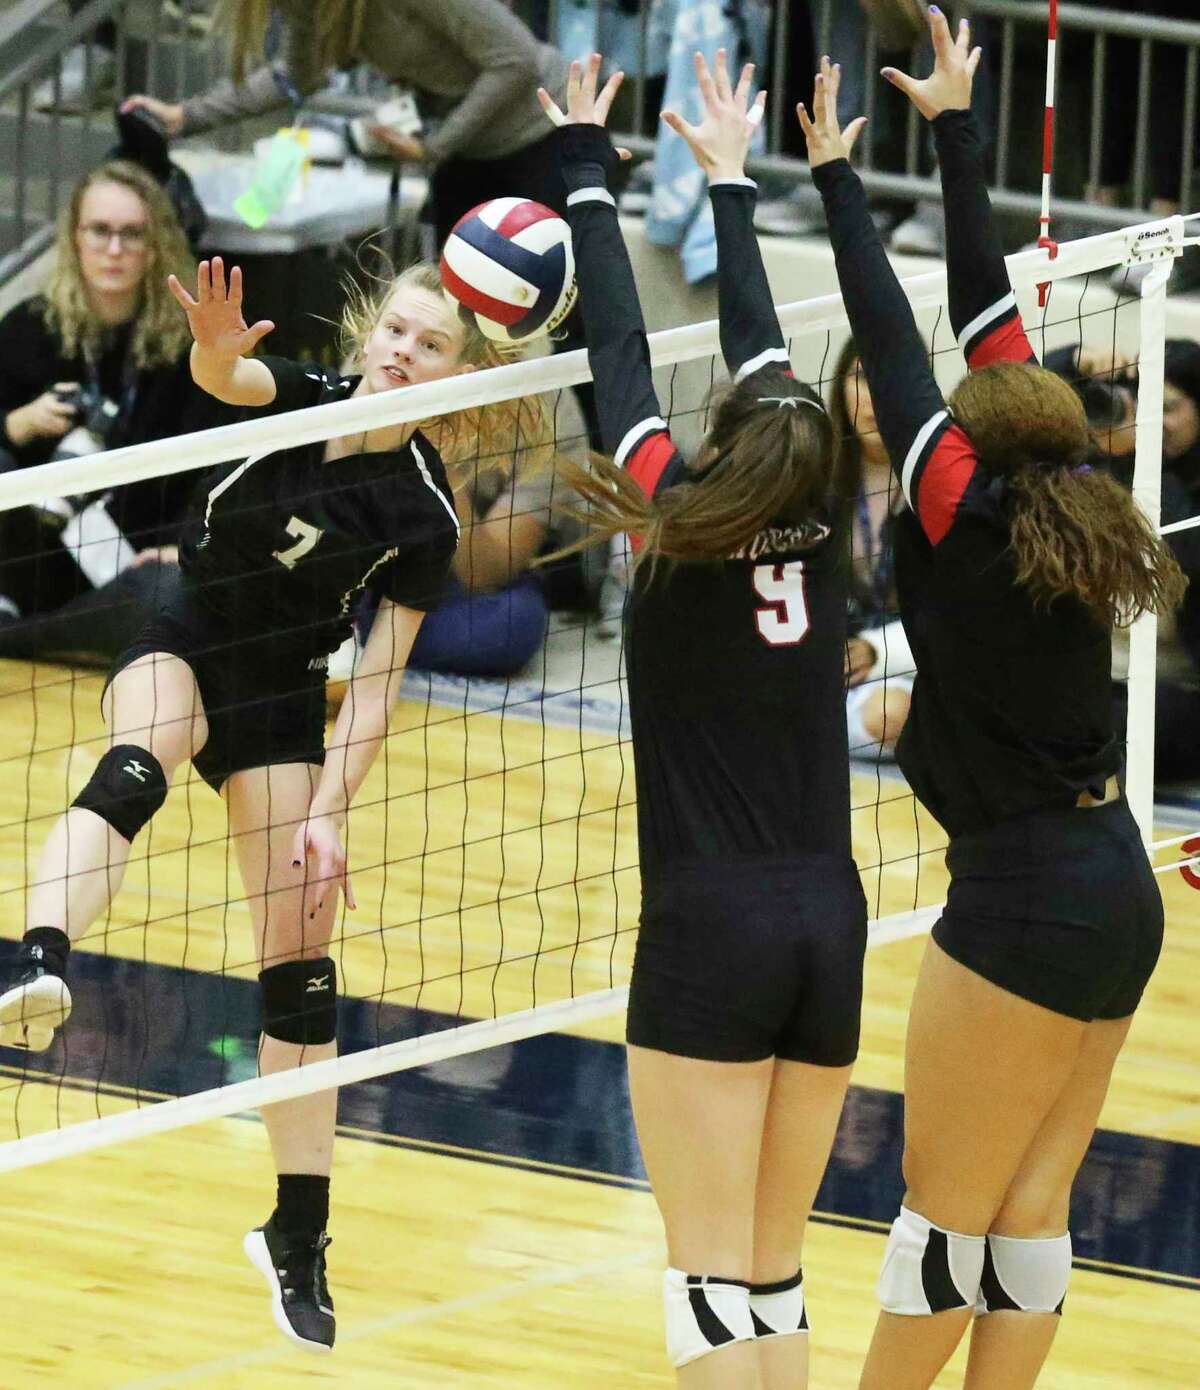 Clark hitter Shadee Briggs gets the ball over defenders as Clark plays Churchill in 6A third round volleyball playoff action at the Alamo Convocation Center on Nov. 12, 2019.